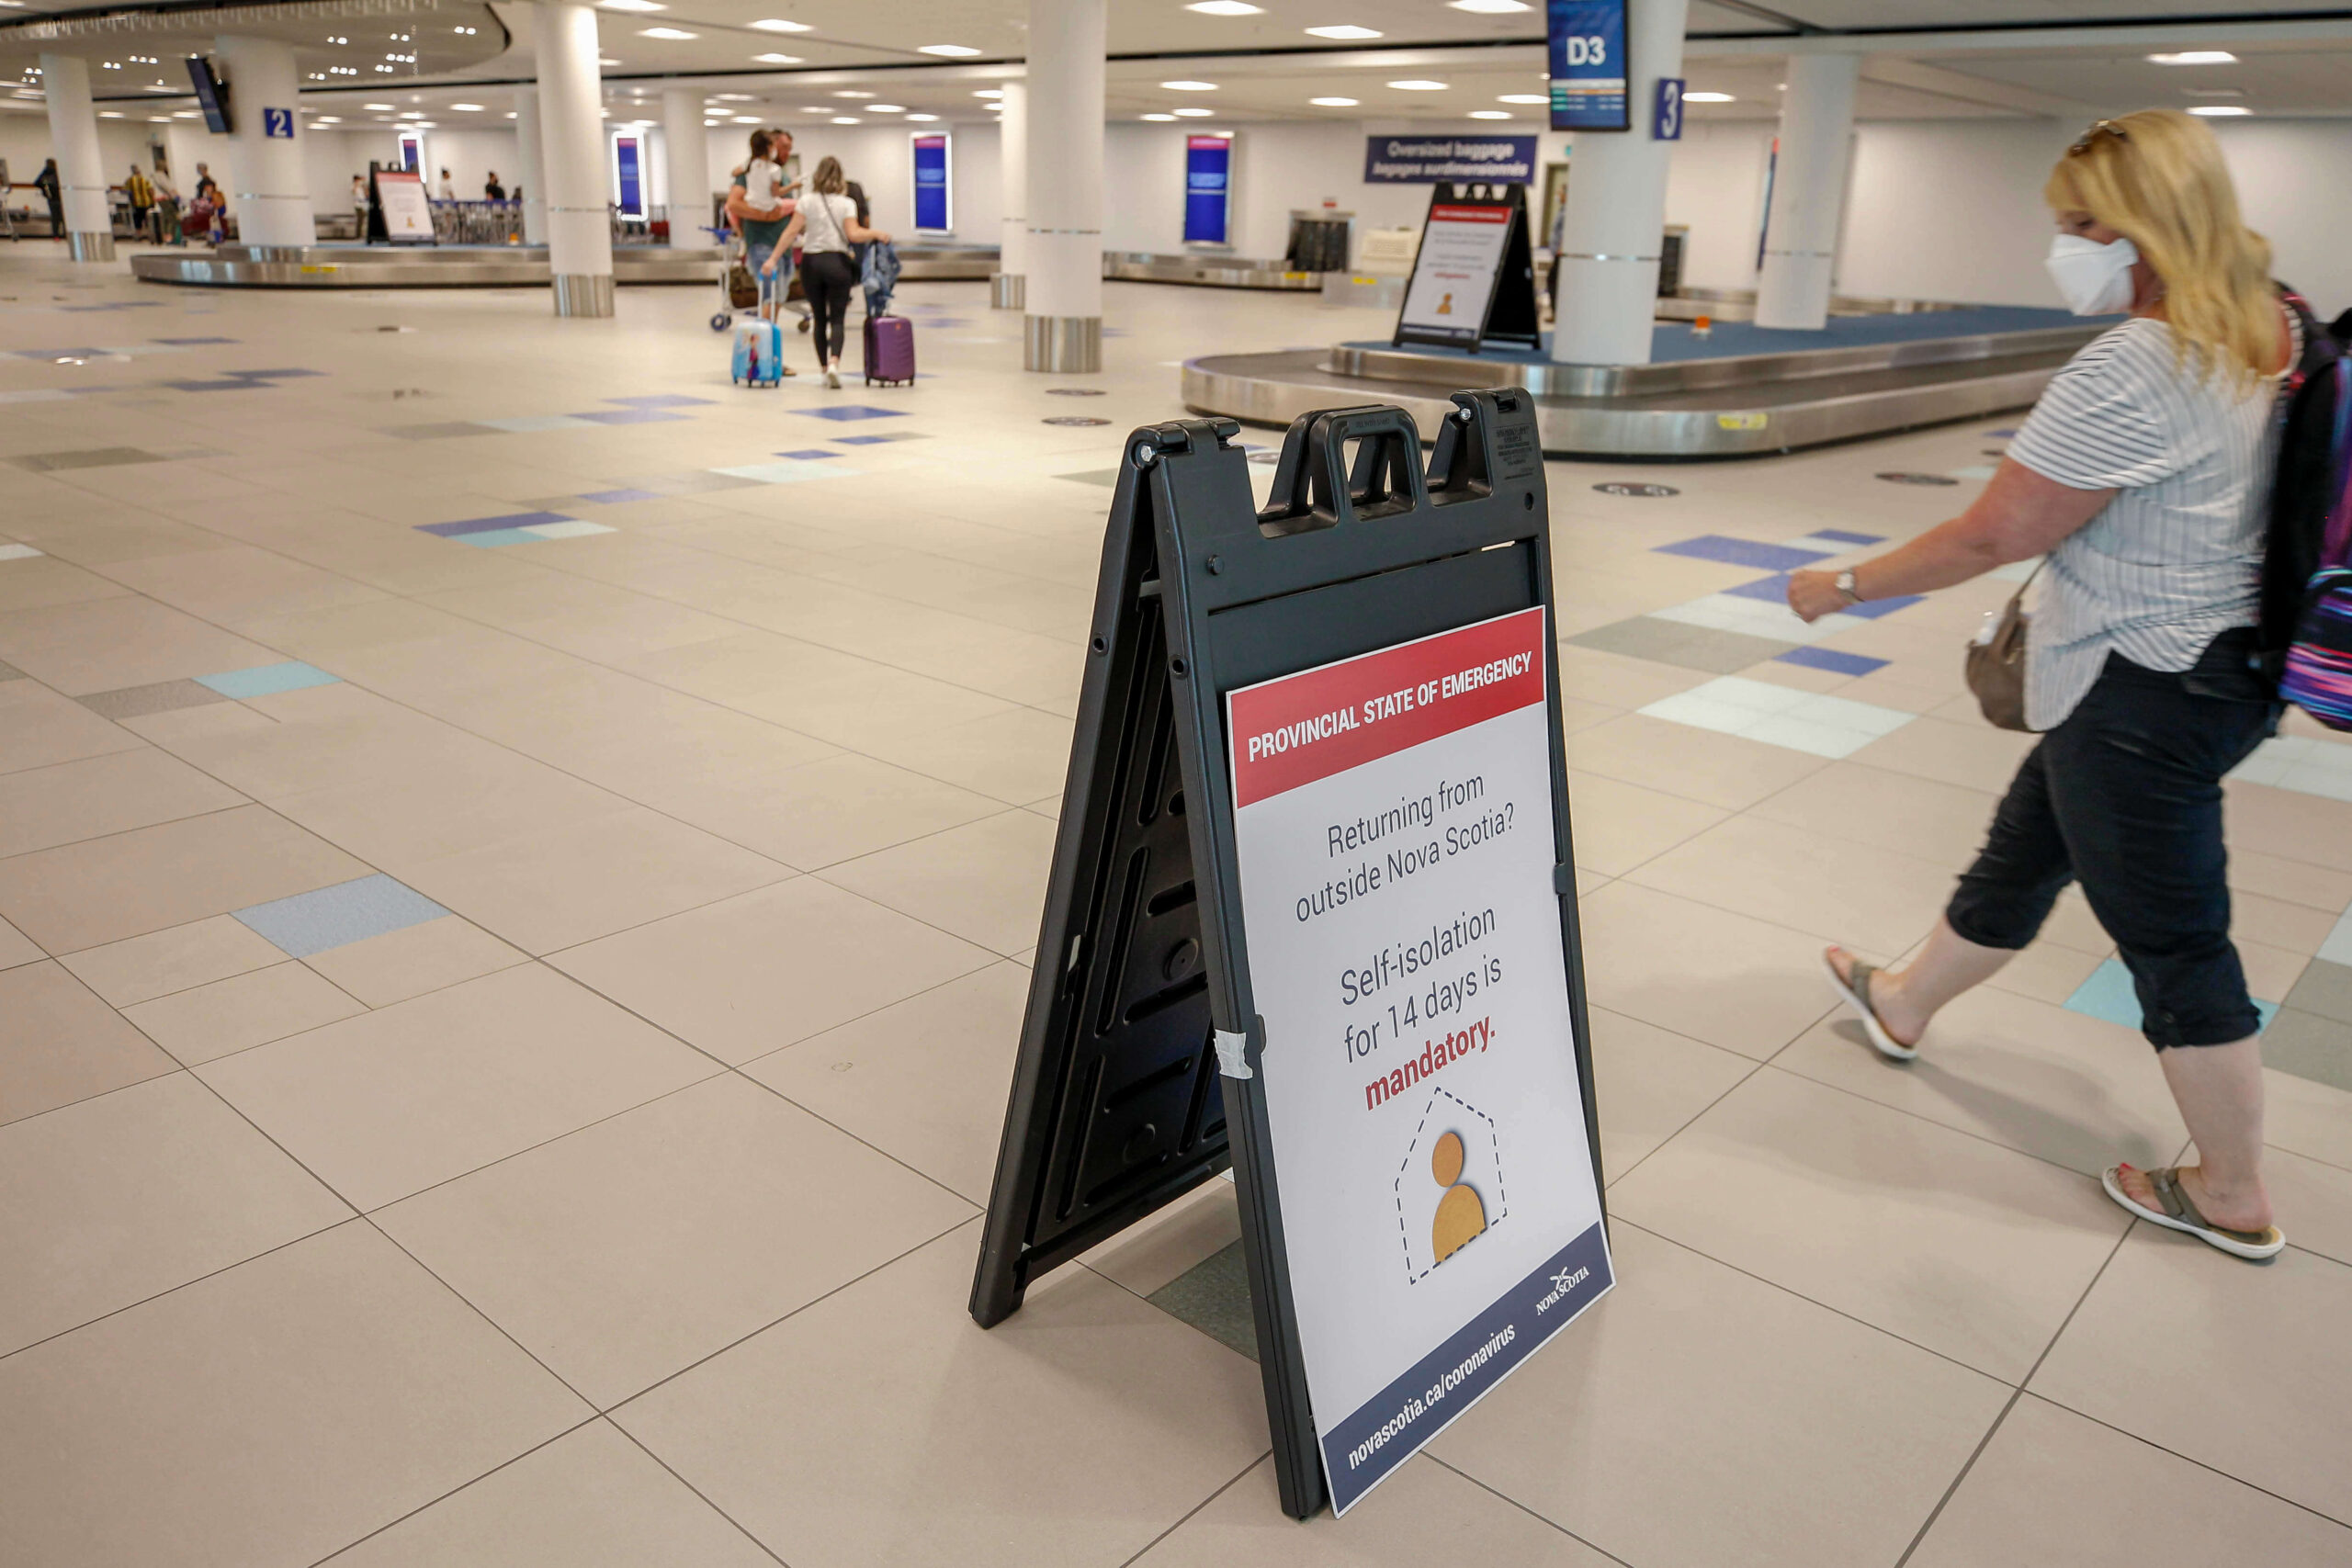 Woman reading sign about mandatory self-isolation when arriving at the airport.